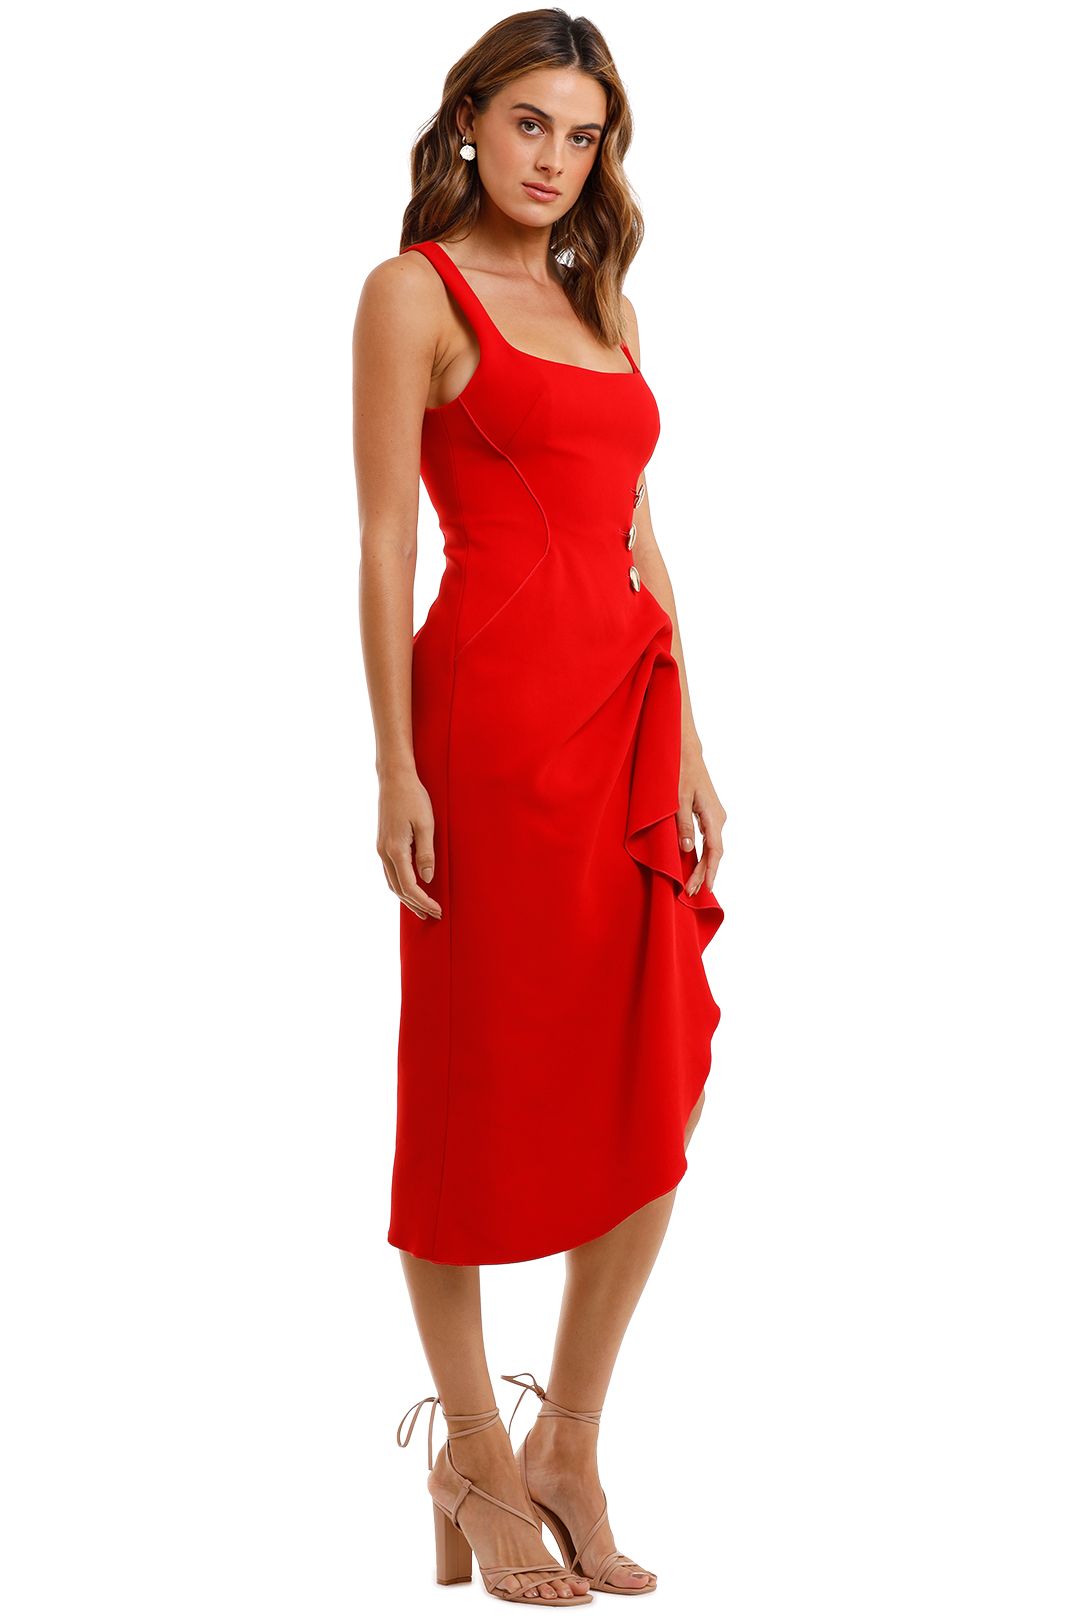 Acler Thistle Dress red square neck